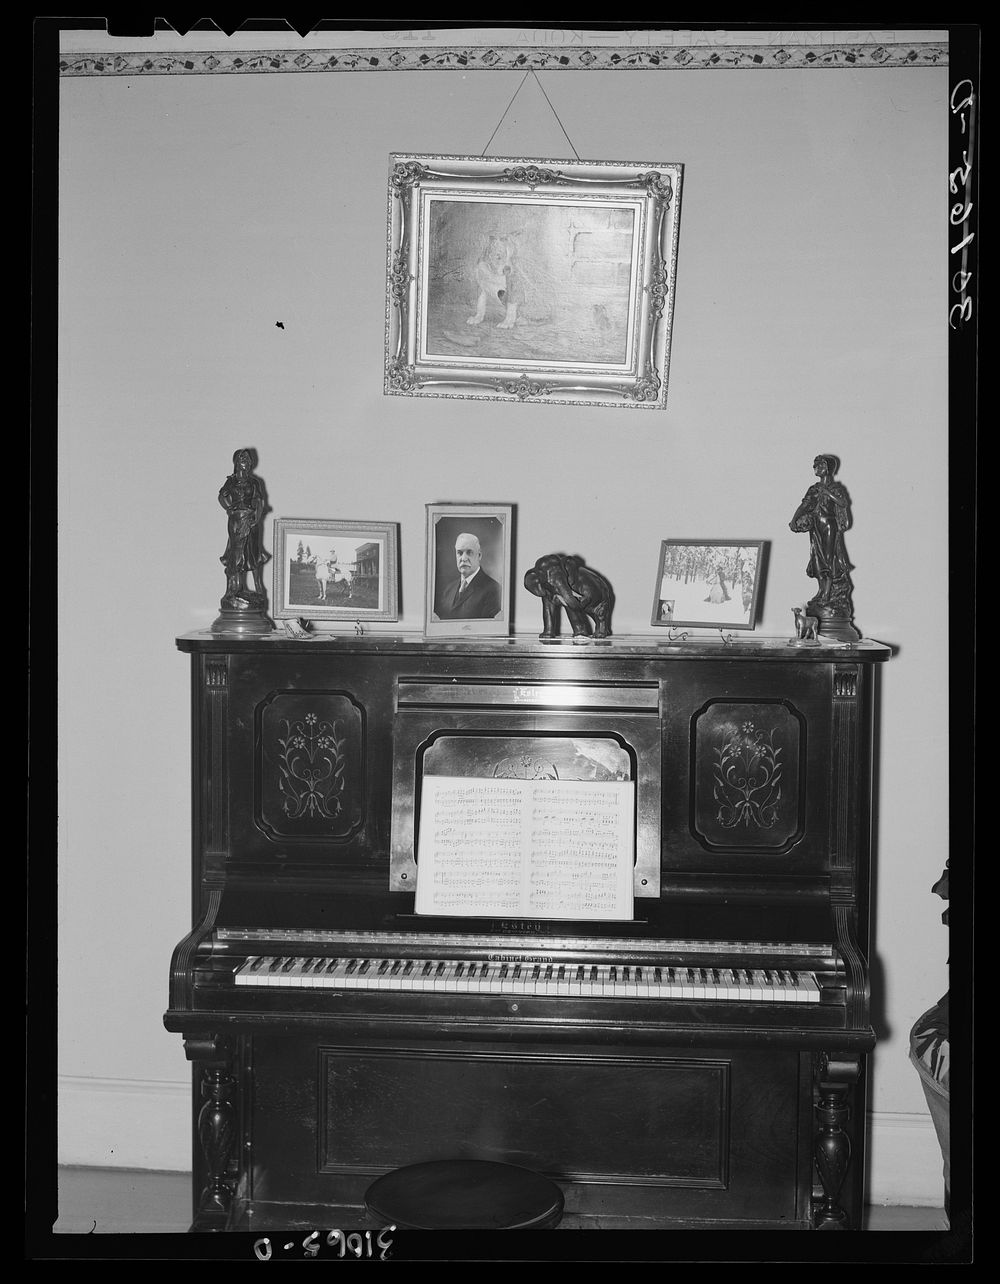 Piano and decoration in house. Two Bit Creek, near Deadwood, South Dakota by Russell Lee